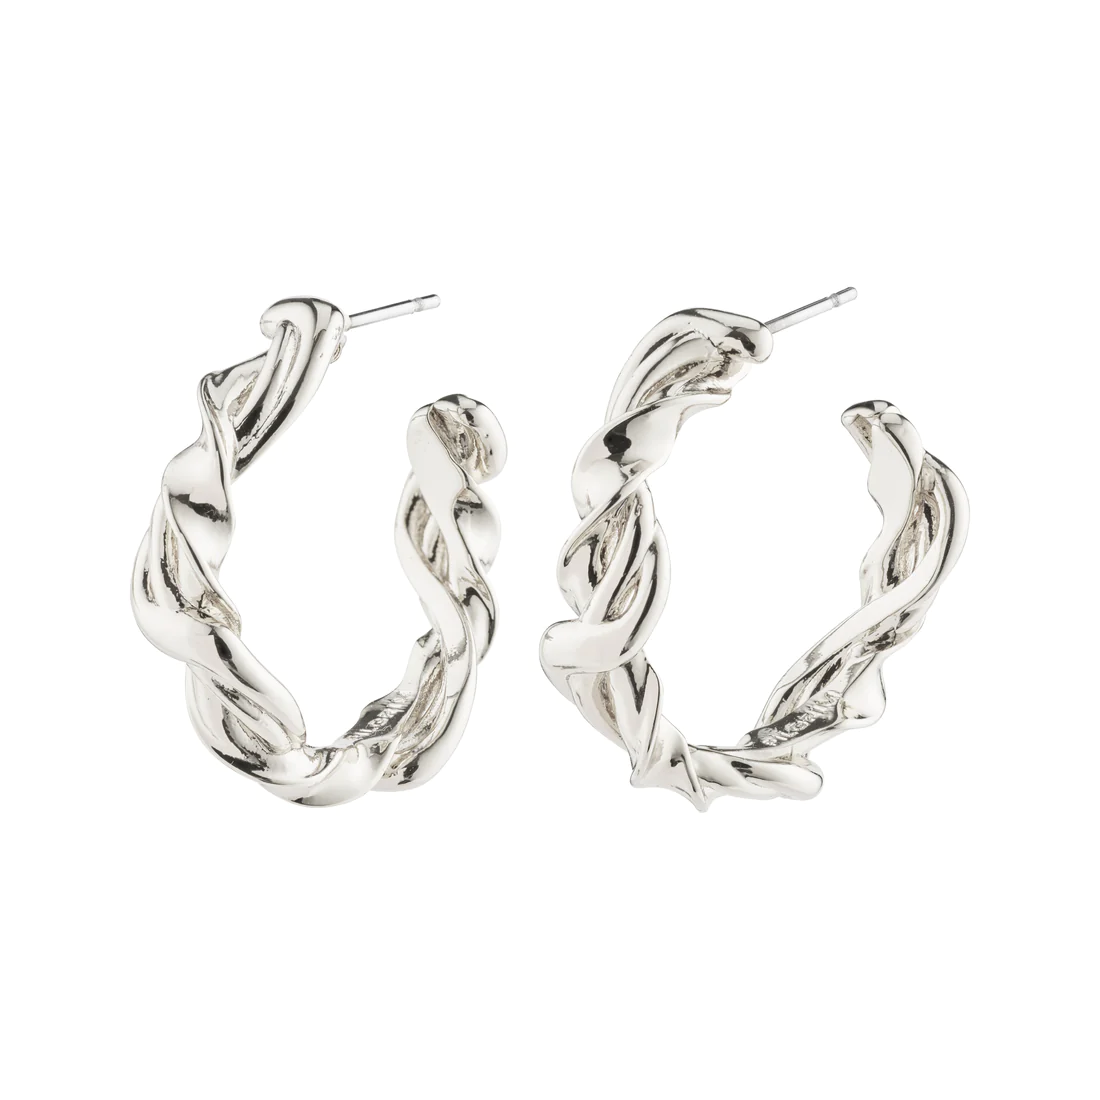 SUN recycled twisted hoops